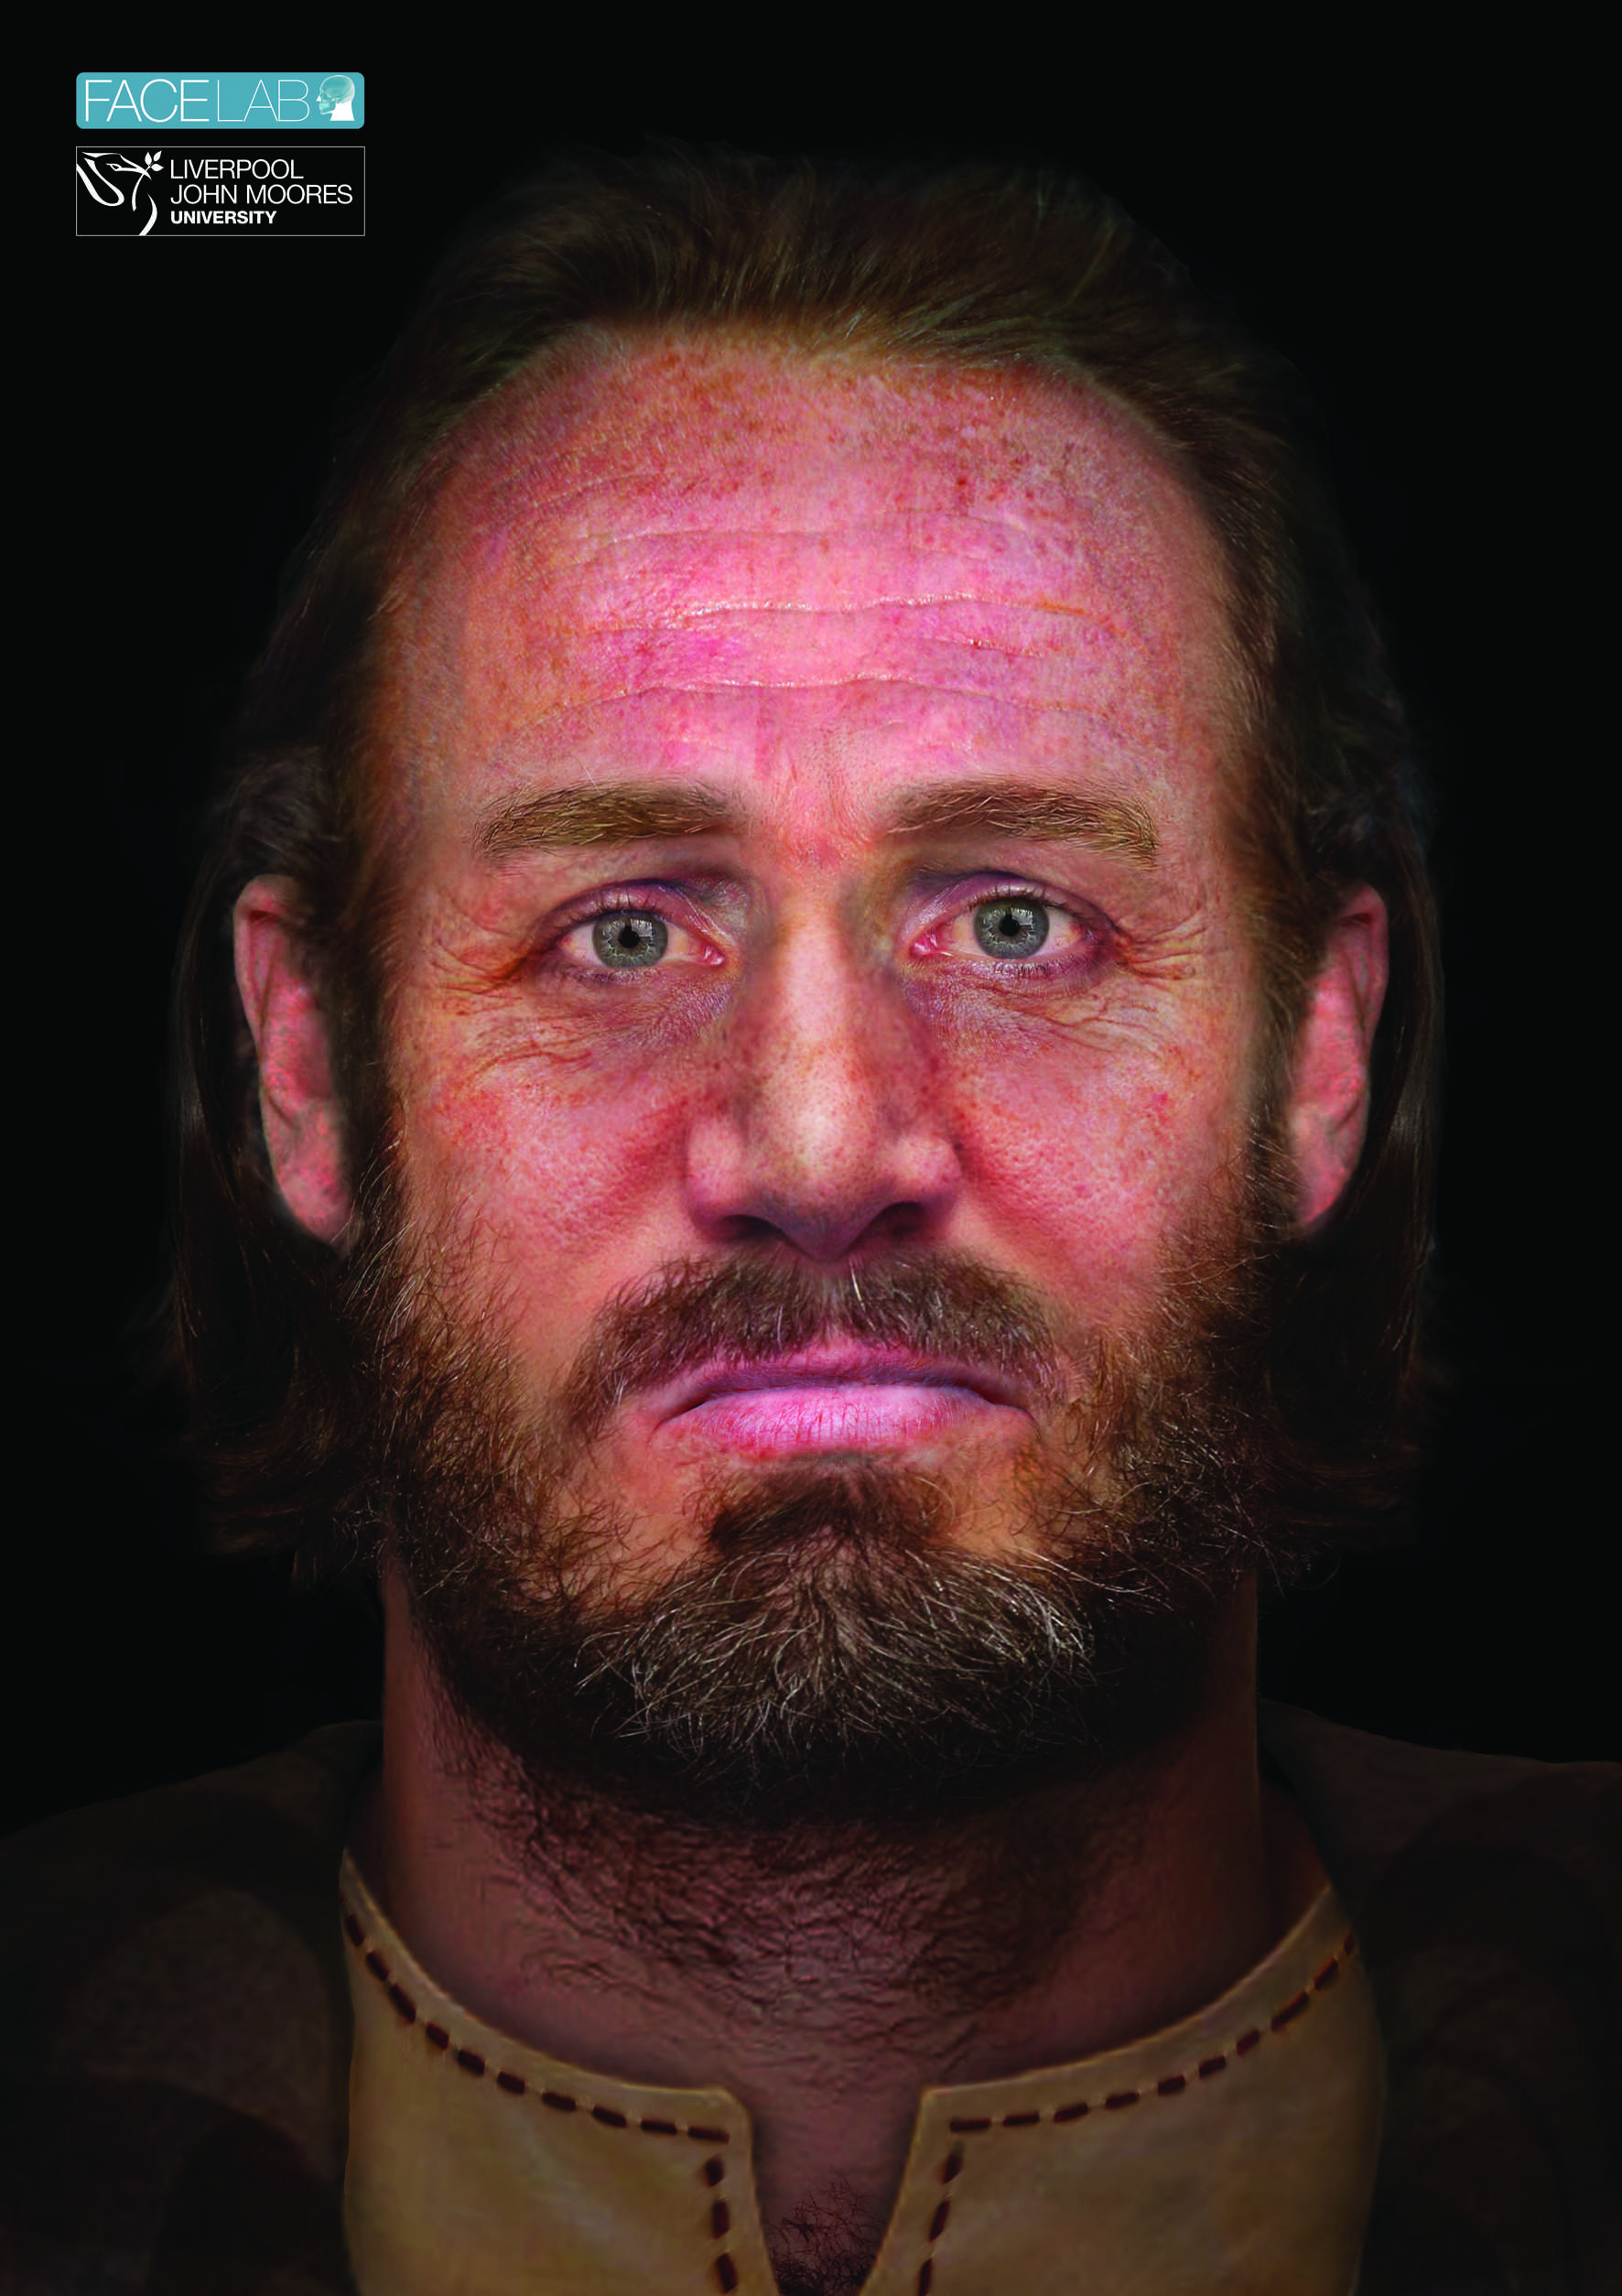 Face of man discovered in six-headed burial recreated.